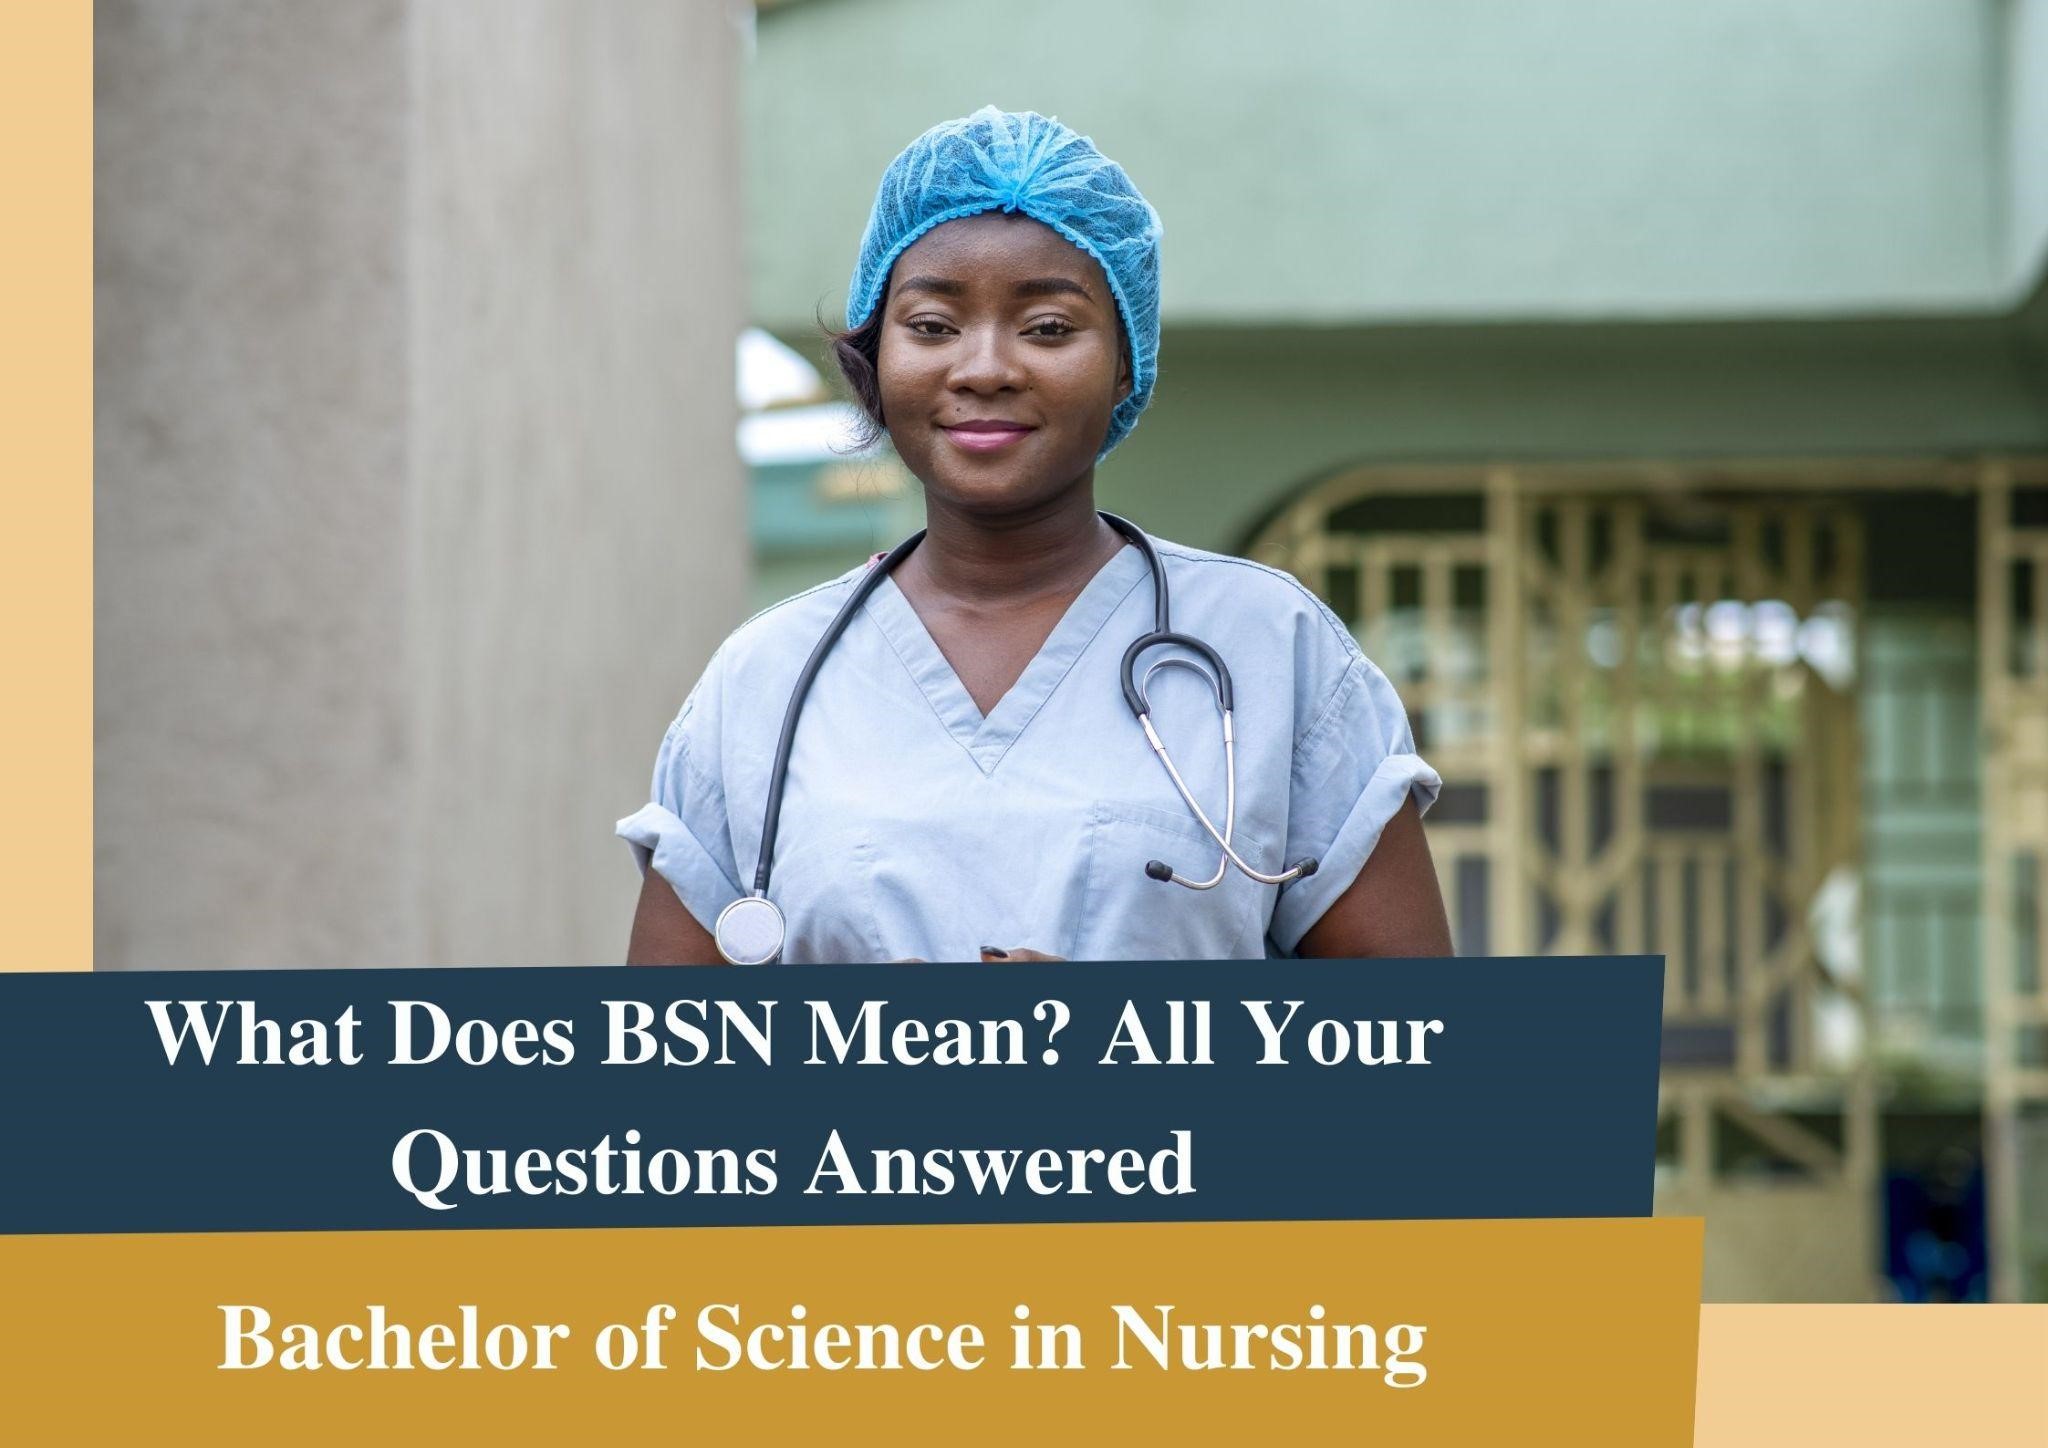 What Does BSN Mean? All Your Questions Answered